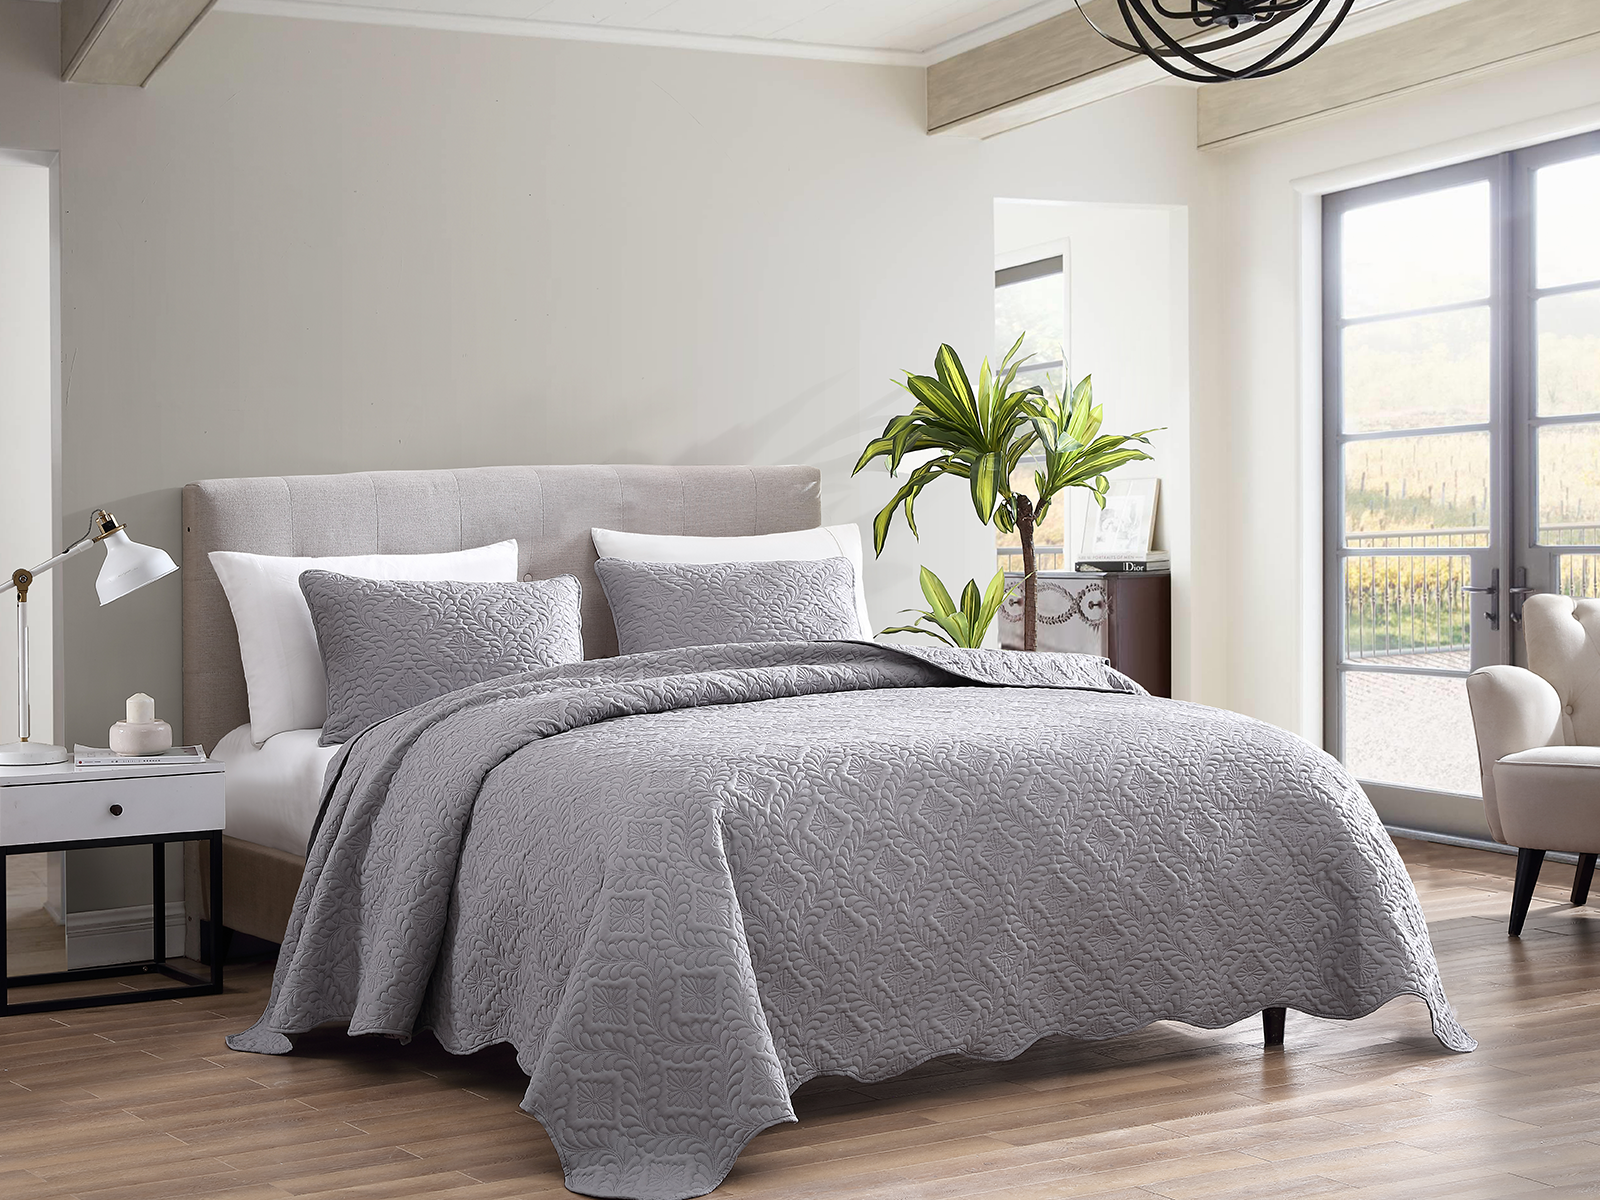 The Nesting Company Queen Ivy Bedspread Set | Gray